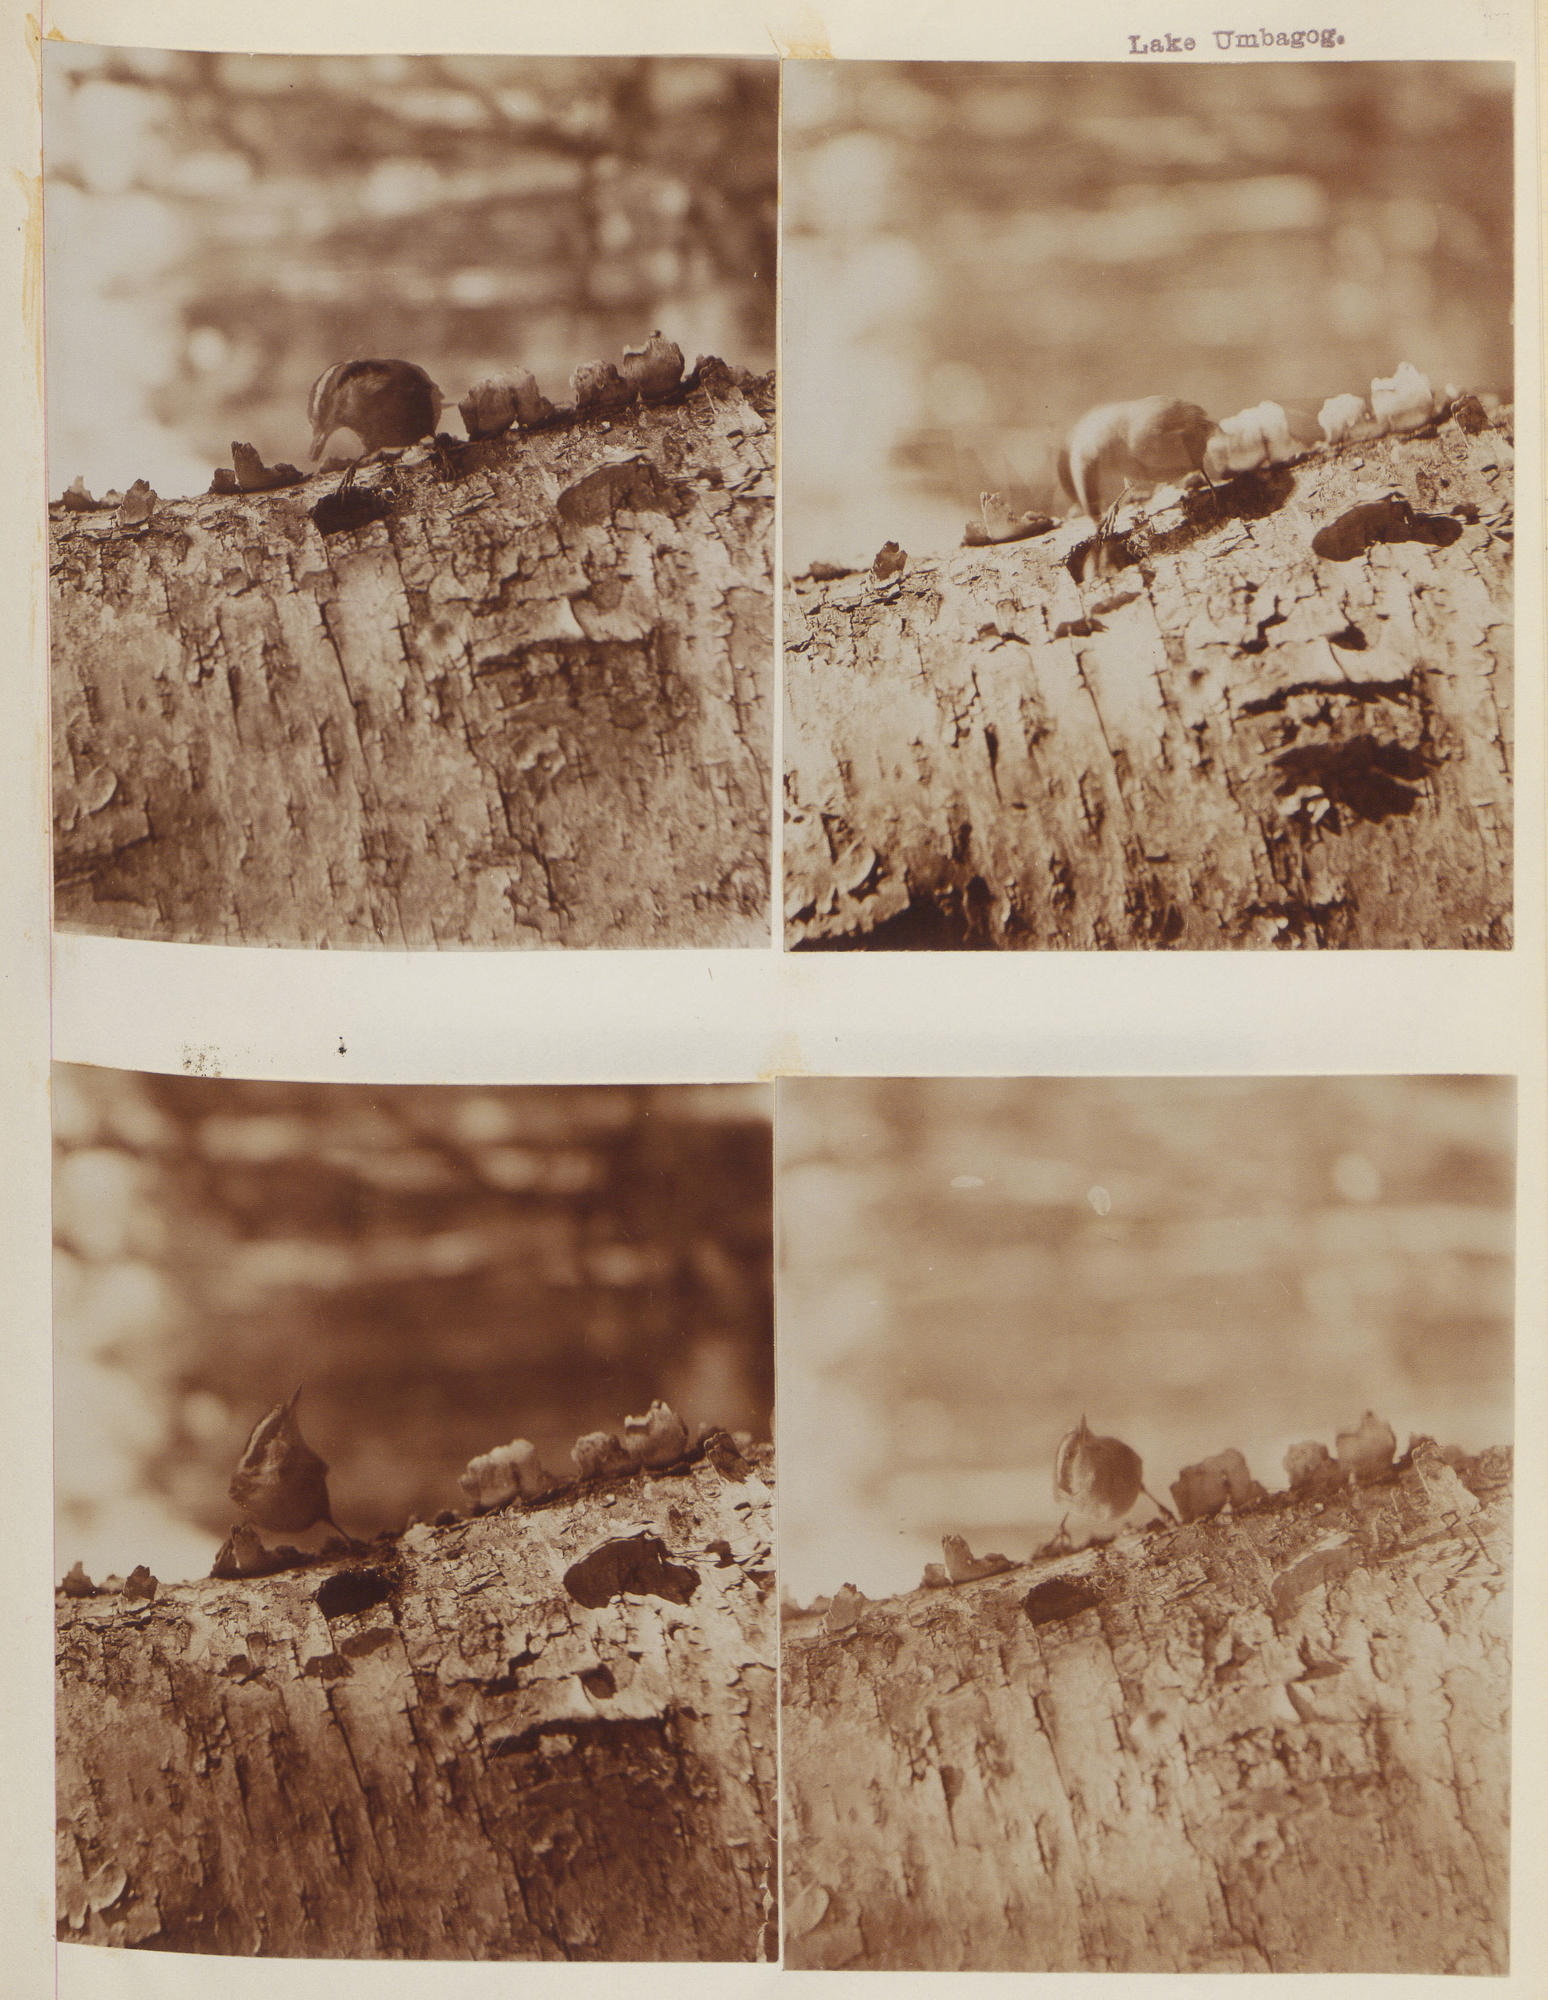 Four sepia-toned photographs of a nuthatch perched on a tree trunk, with varying focus and clarity.